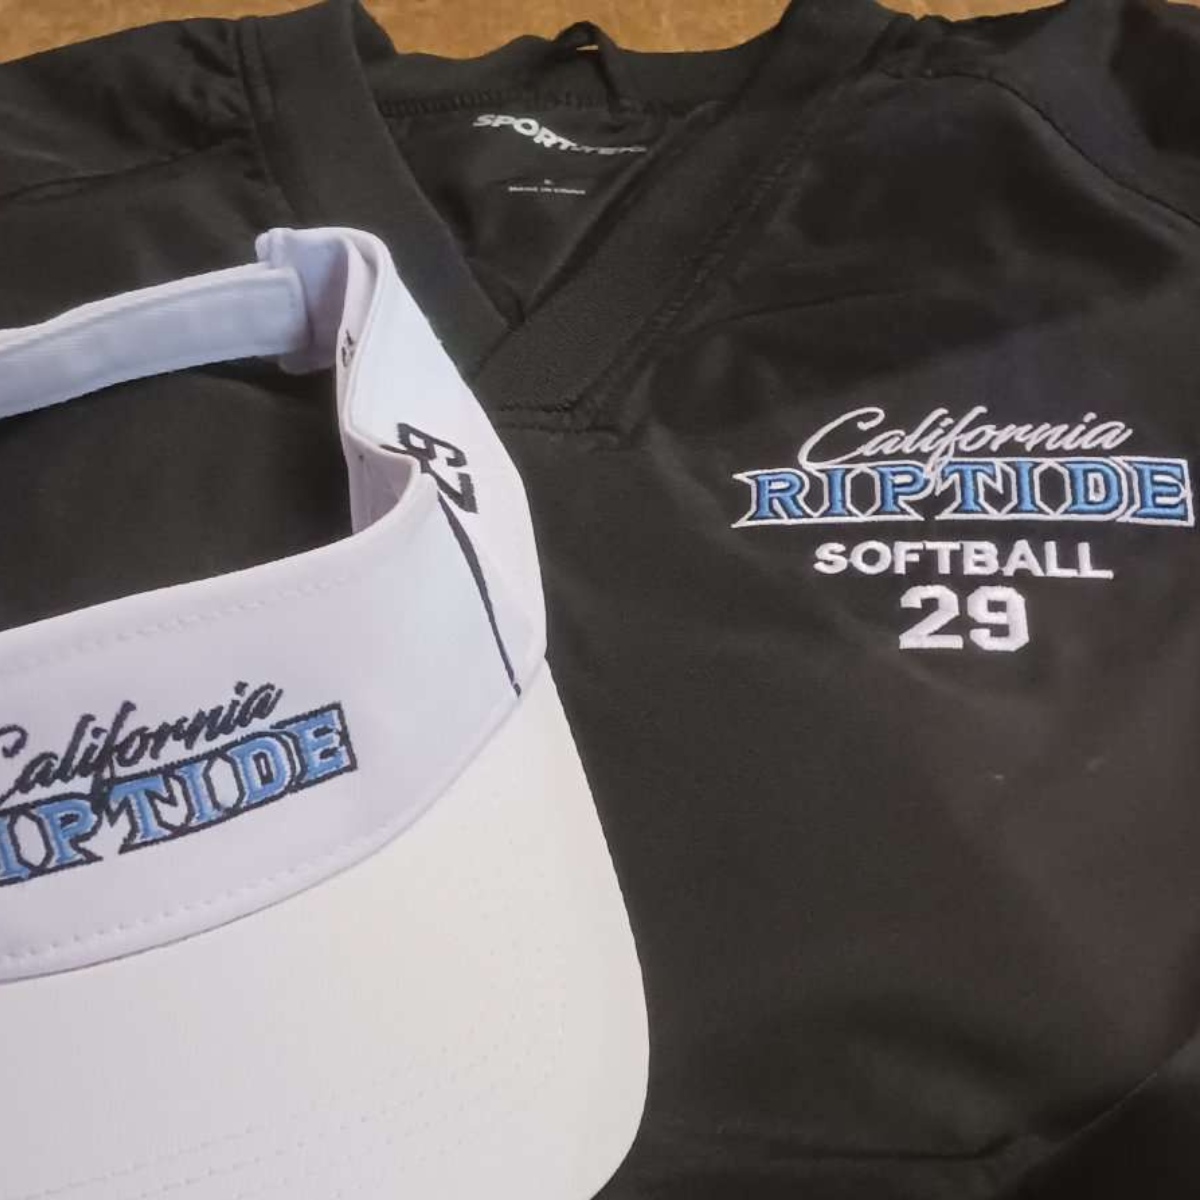 California RIPTIDE Softball shirts and caps 🥎 Who else wants personalized products with their logo? 
.
.
.
#logos #brandingdesign #brand #printondemand #customizedproducts #commercialprinting #advertising #creative #business #customizedapparel #marketing #softball #sports